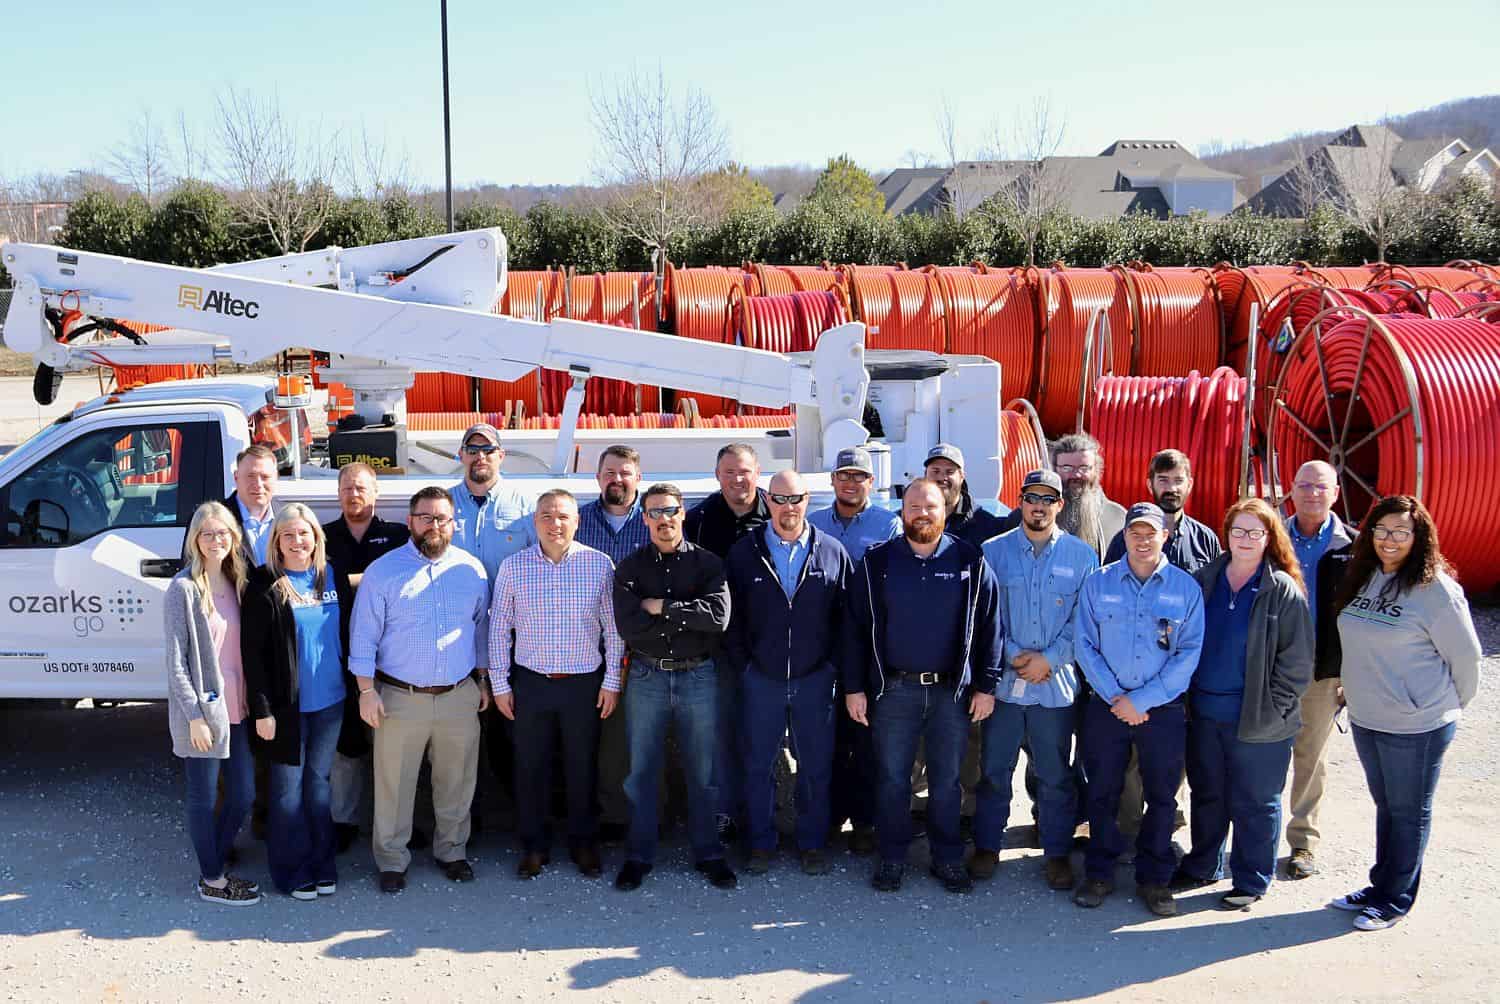 Ozarks Go employee group photo in front of a lift truck and fiber cables.